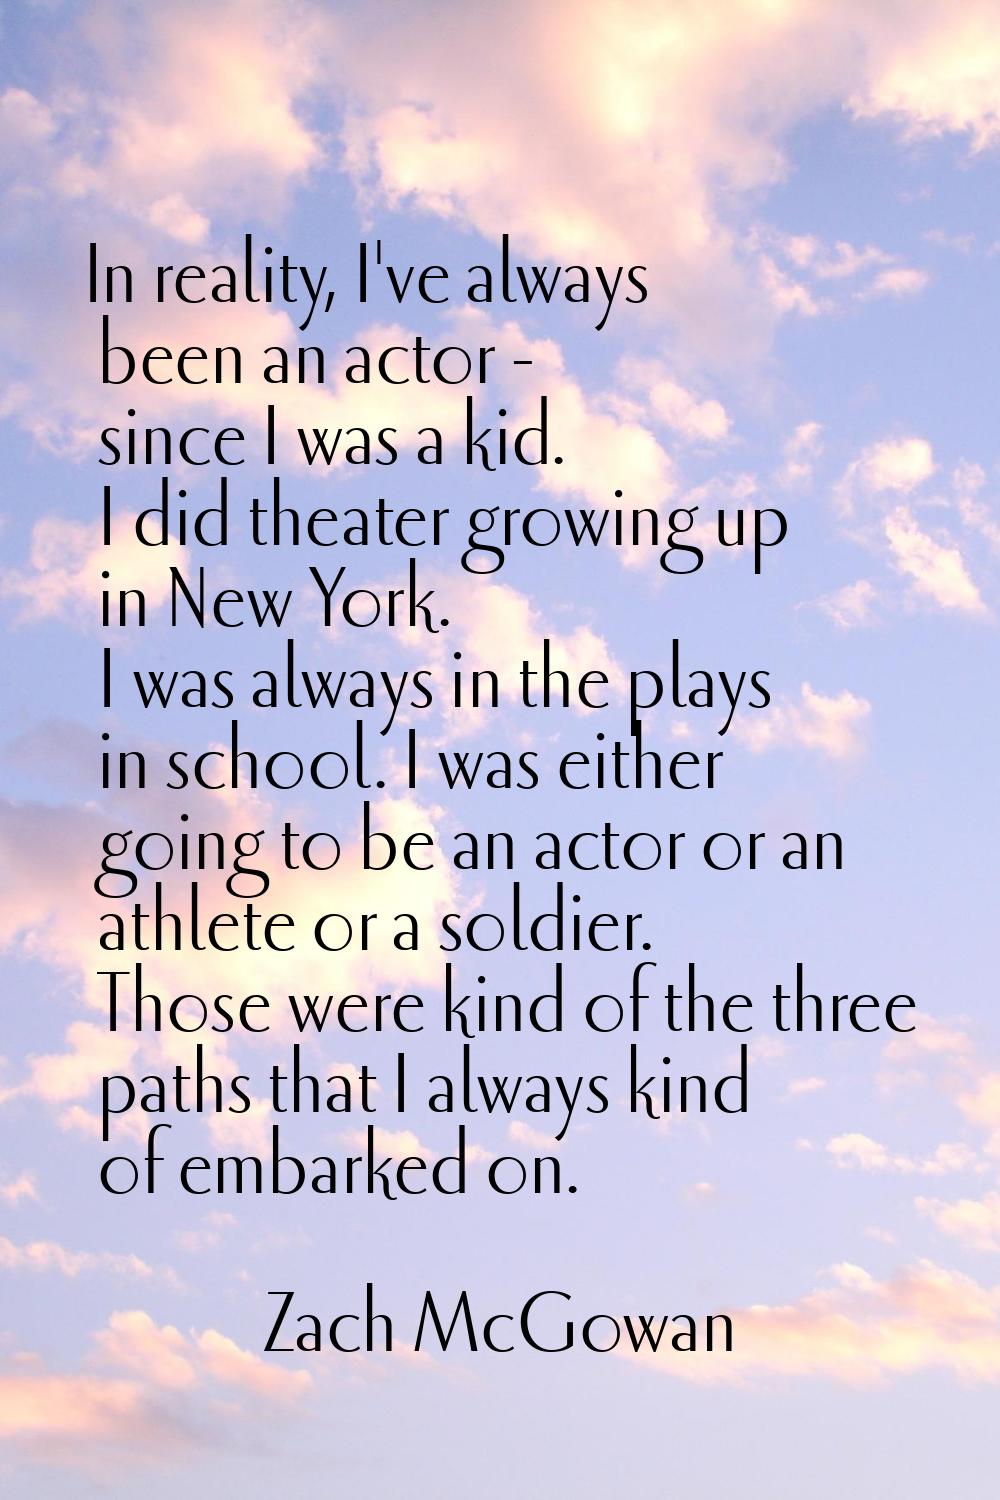 In reality, I've always been an actor - since I was a kid. I did theater growing up in New York. I 